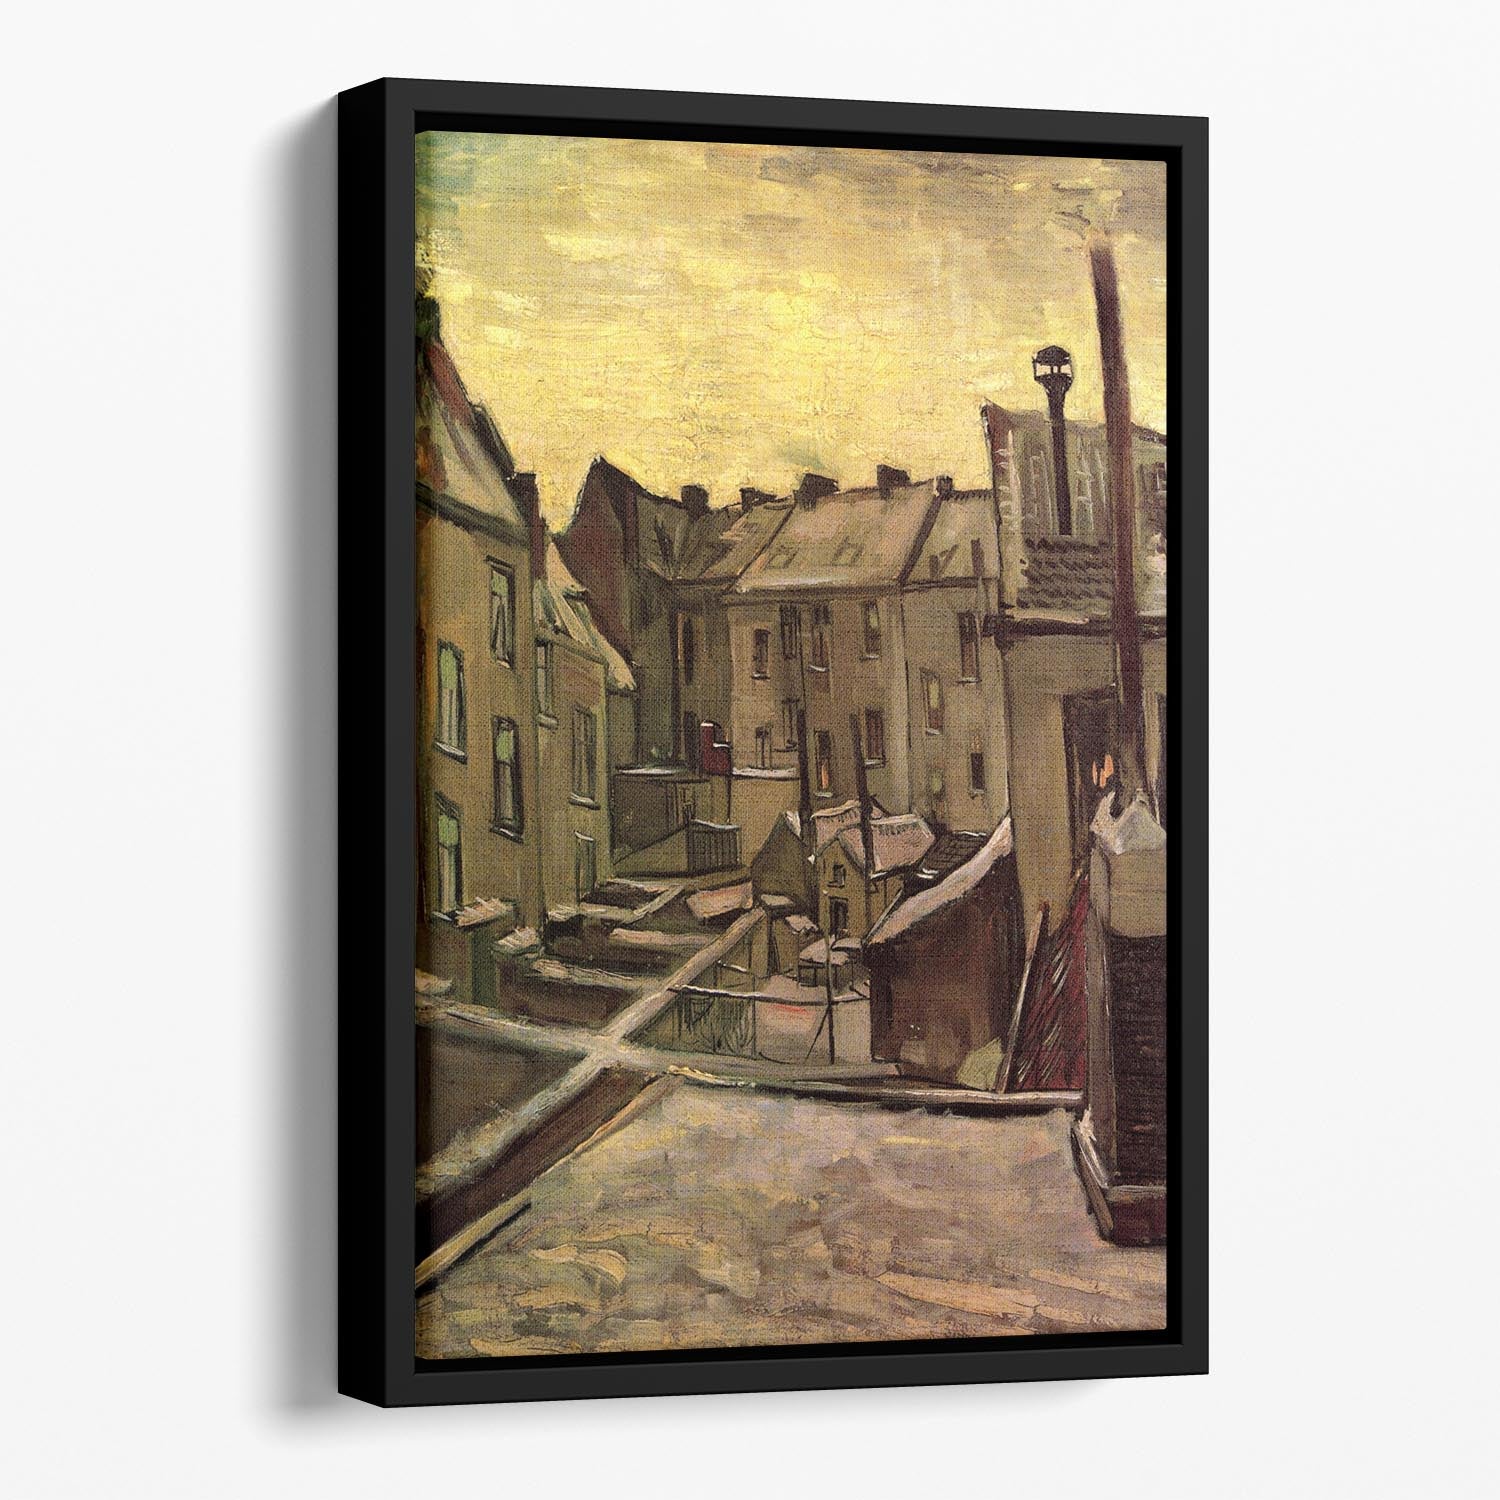 Backyards of Old Houses in Antwerp in the Snow by Van Gogh Floating Framed Canvas